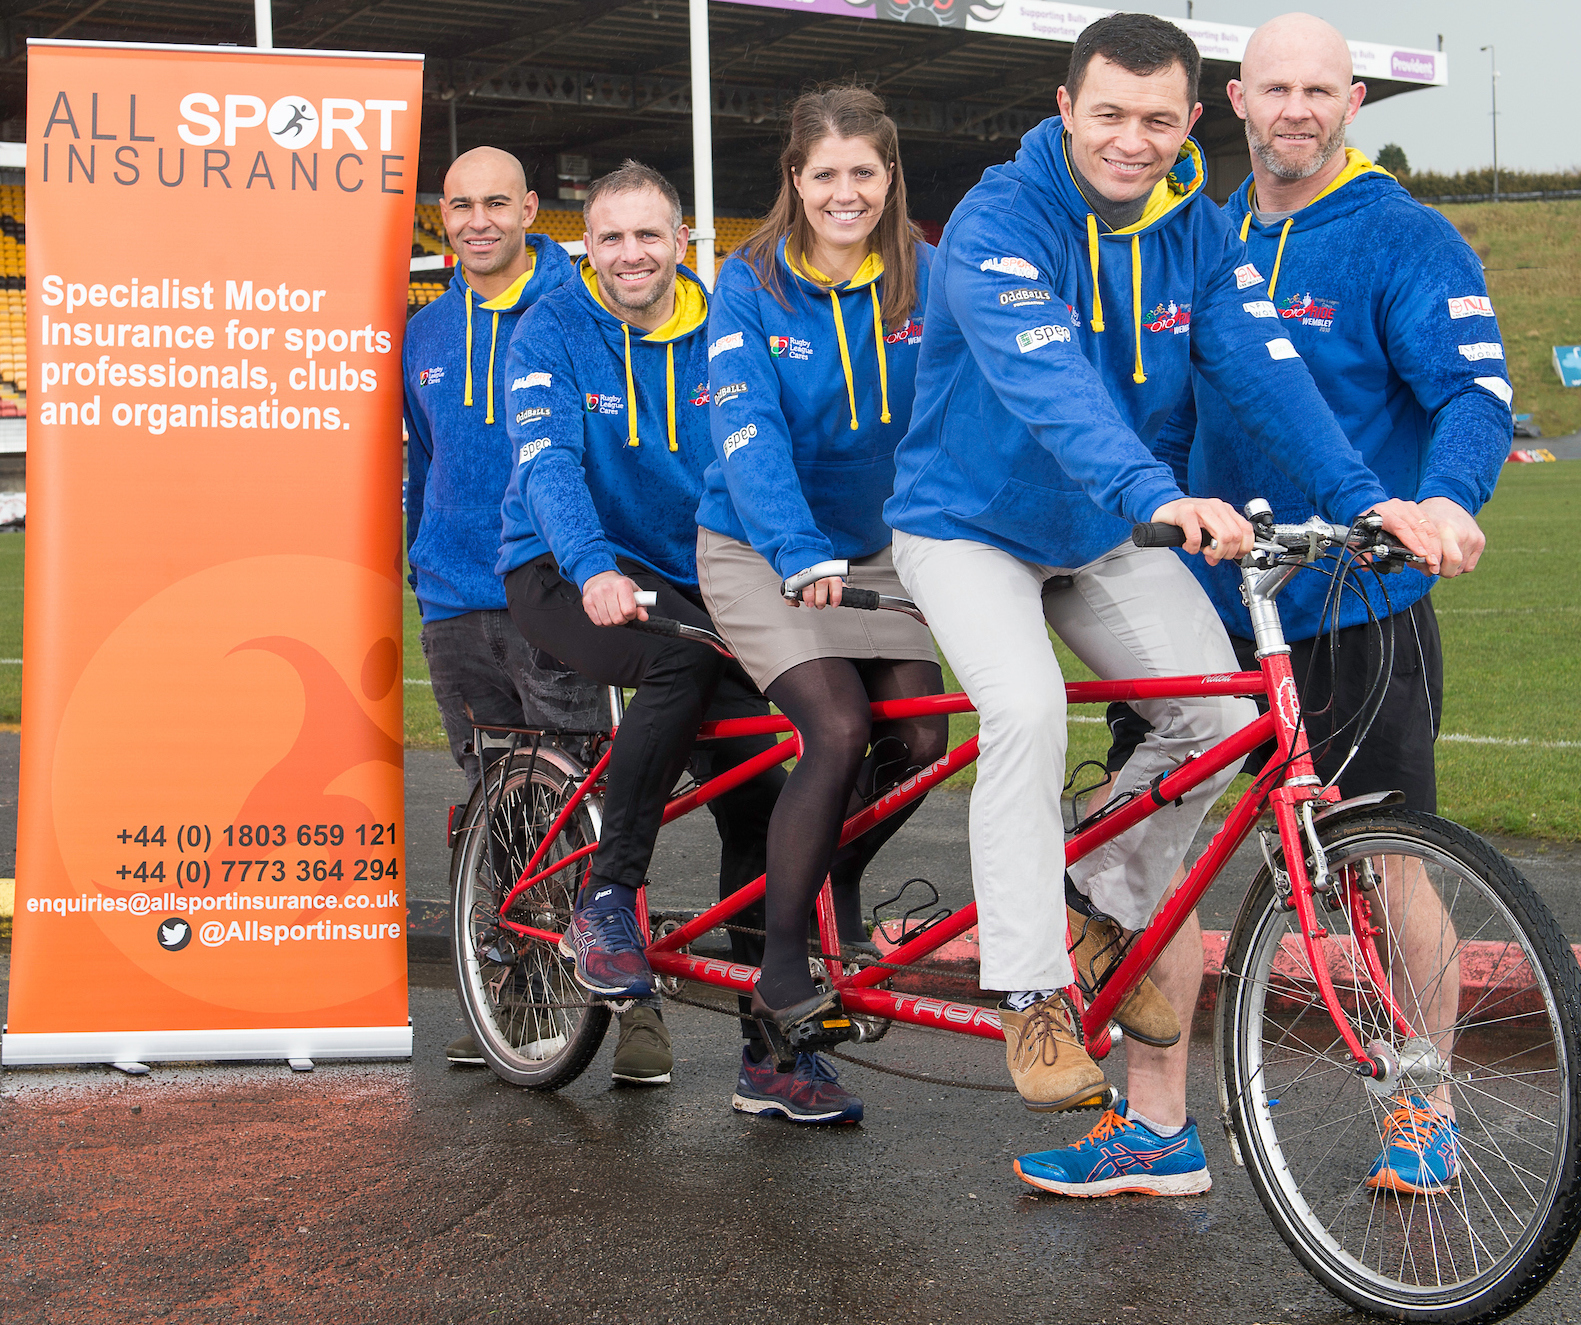 All Sport Insurance saddle up for the 2018 Ride to Wembley